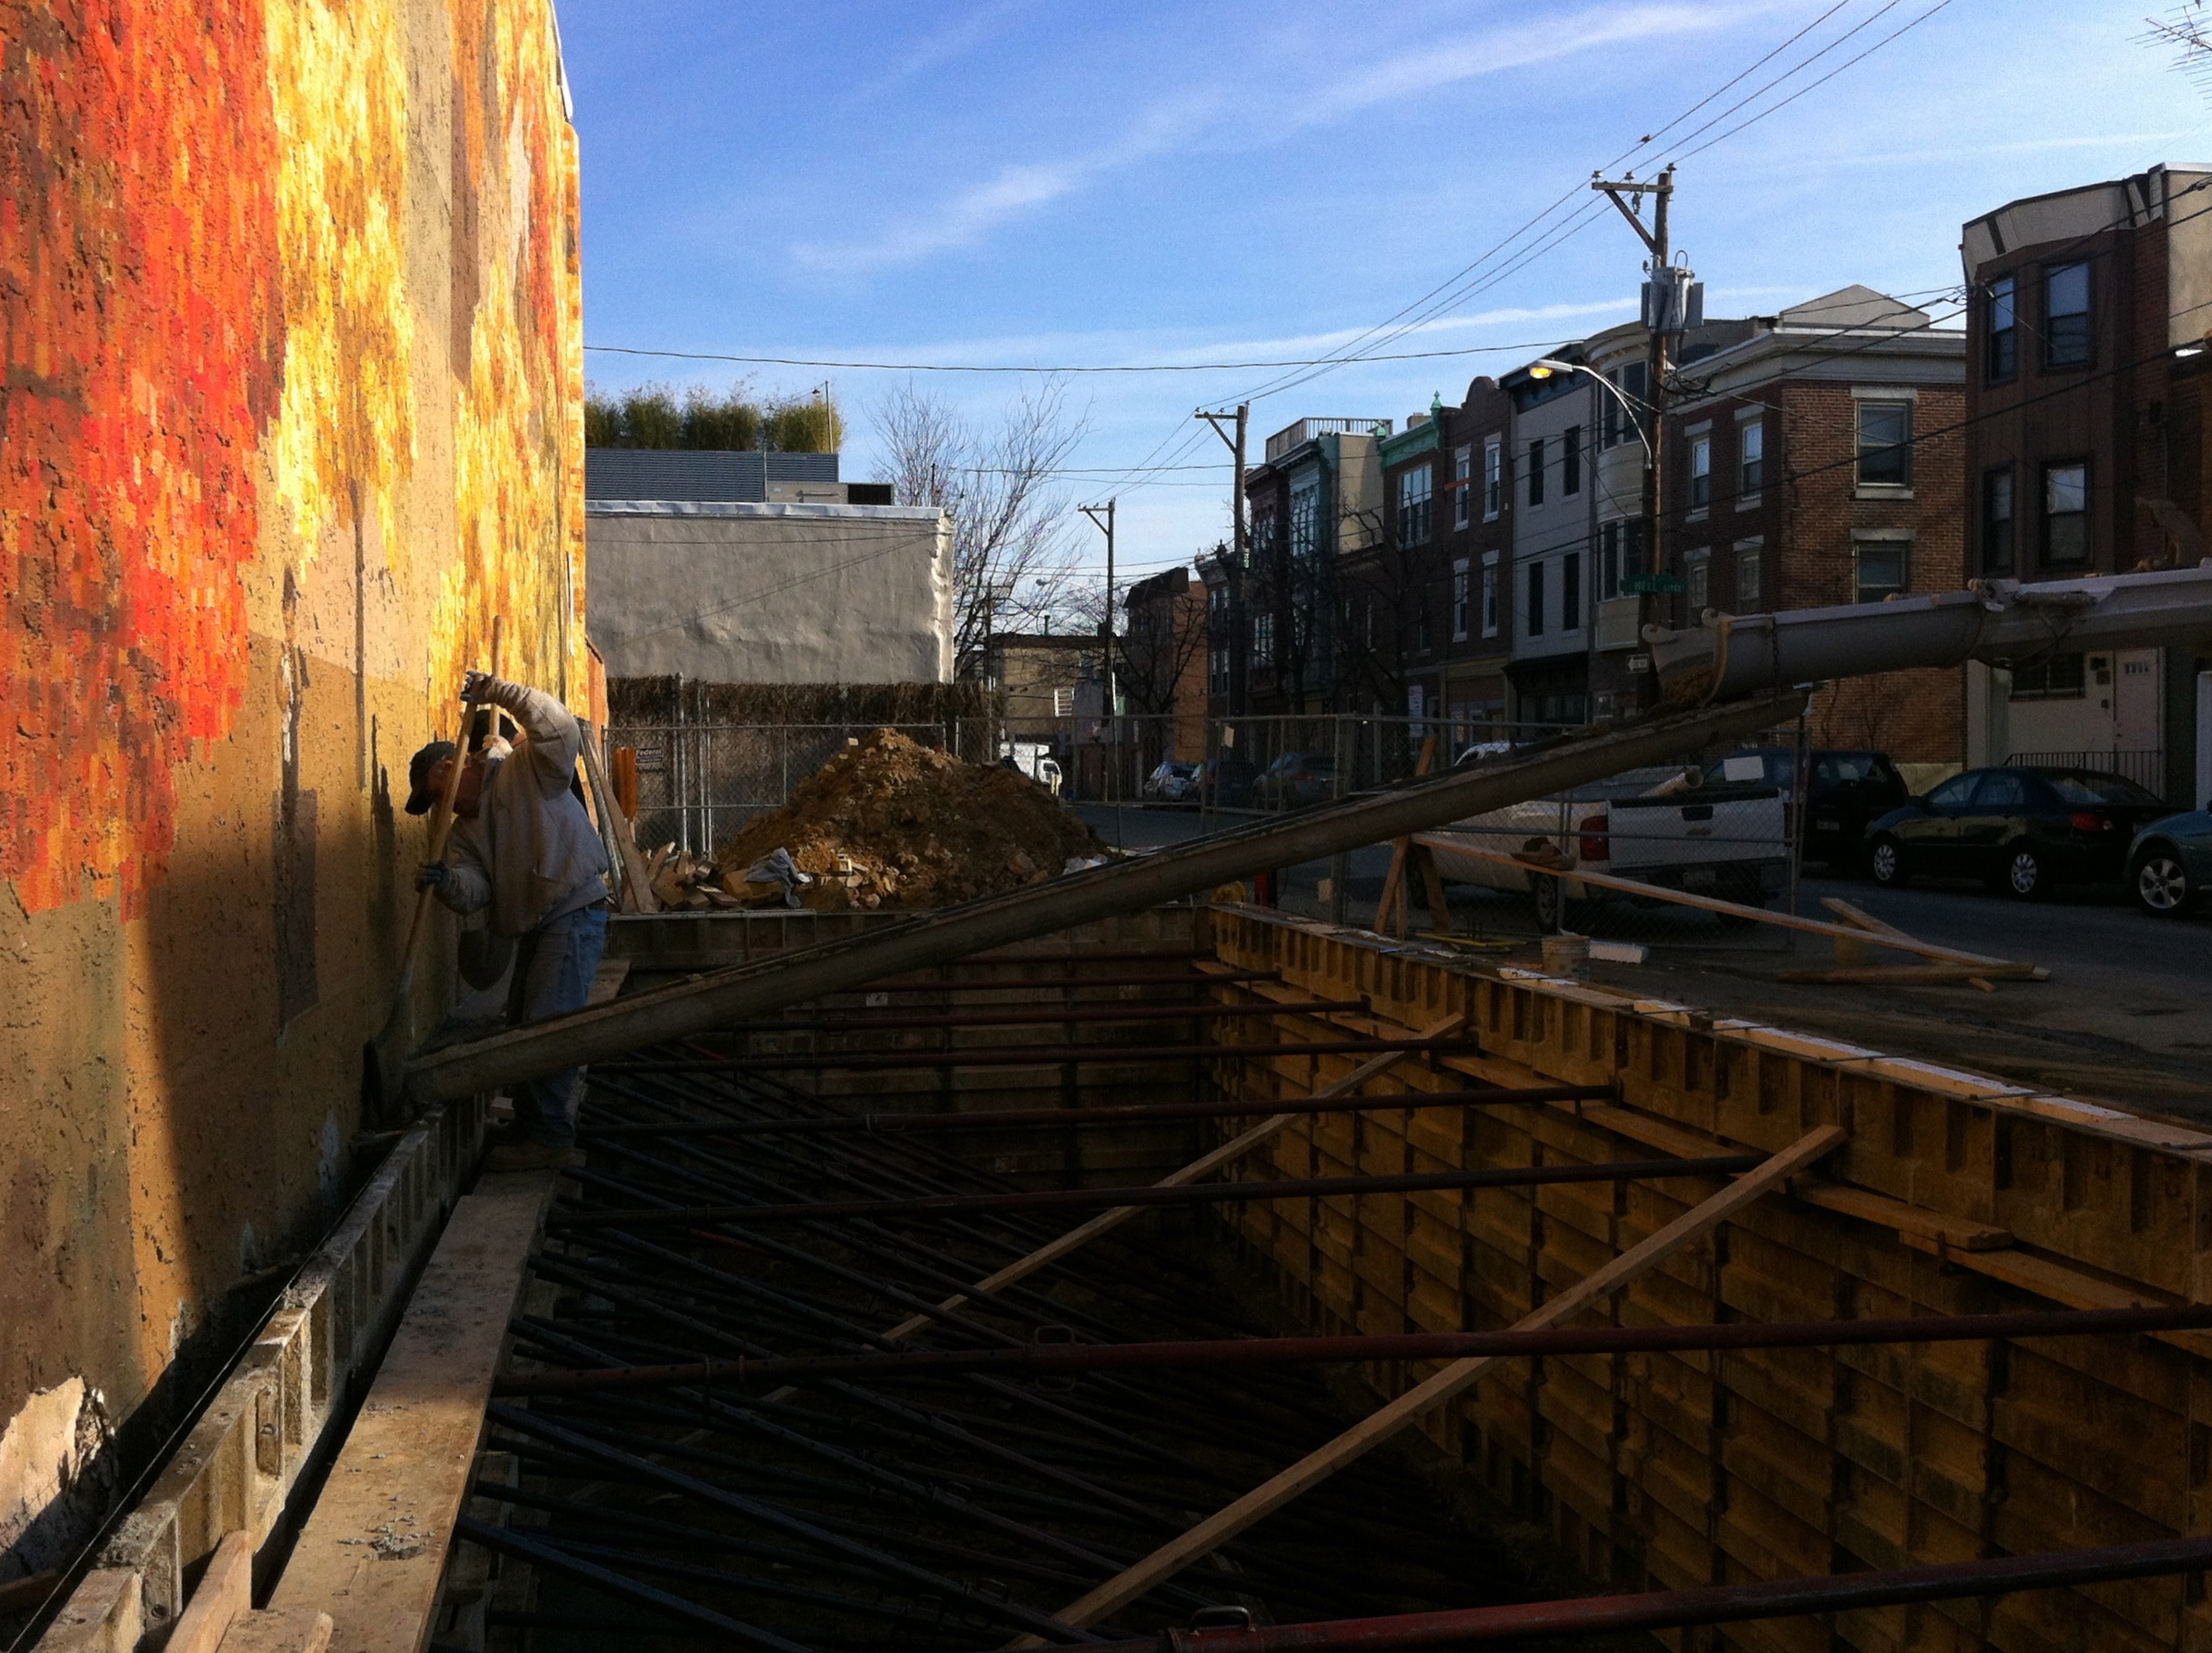 Construction of the new rowhouse at 9th and Bainbridge next to Autumn in December 2011.